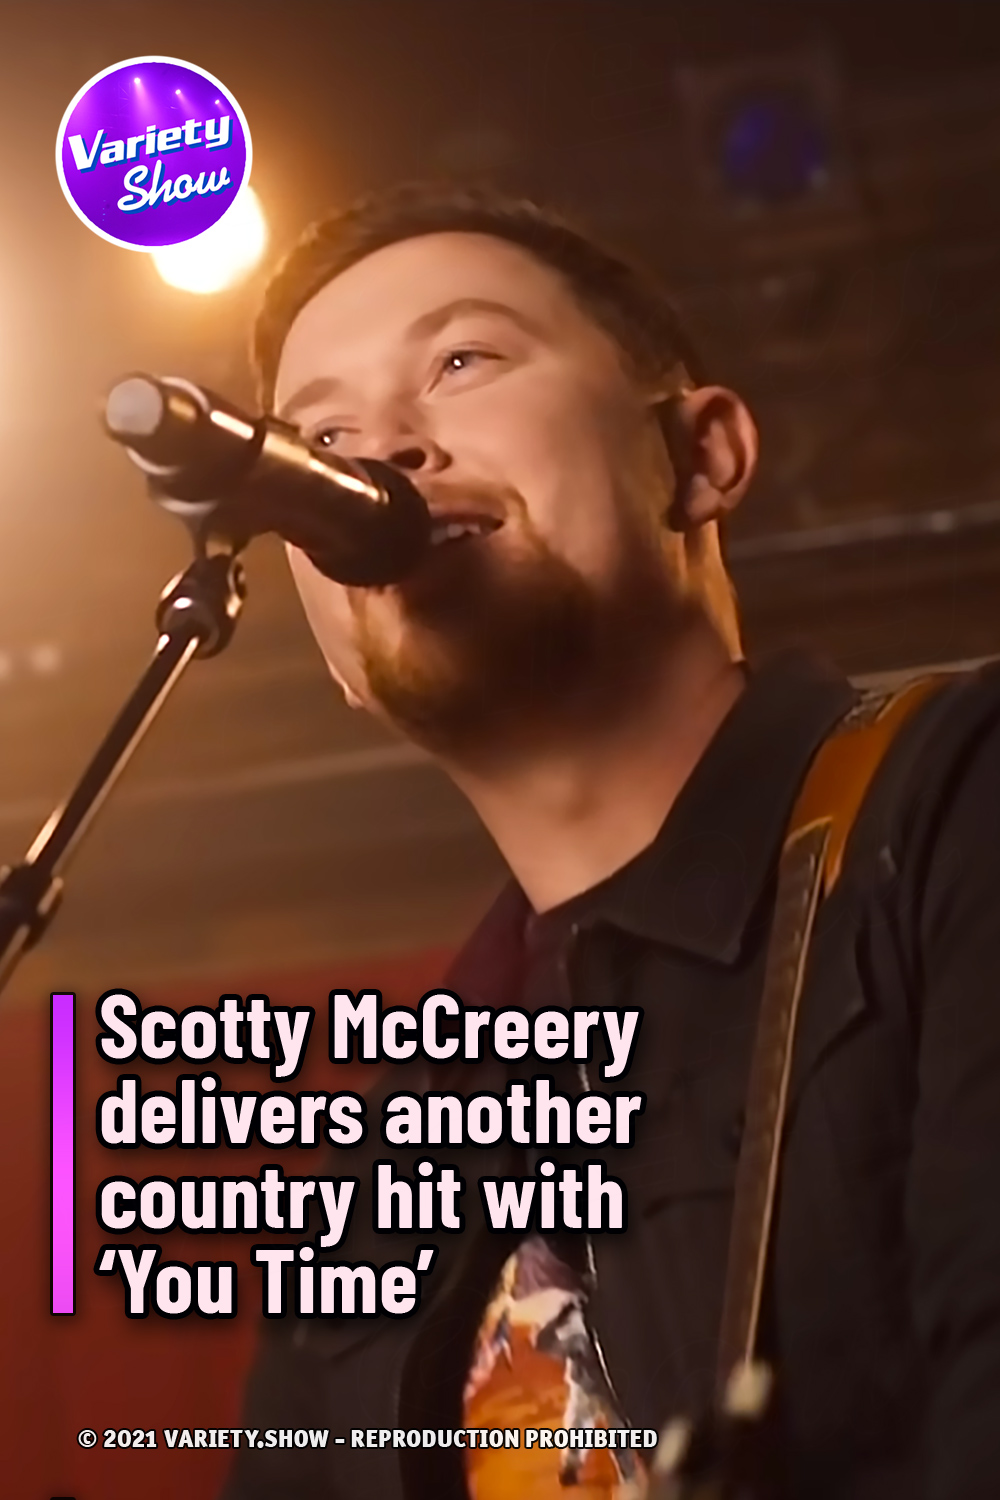 Scotty McCreery delivers another country hit with ‘You Time’